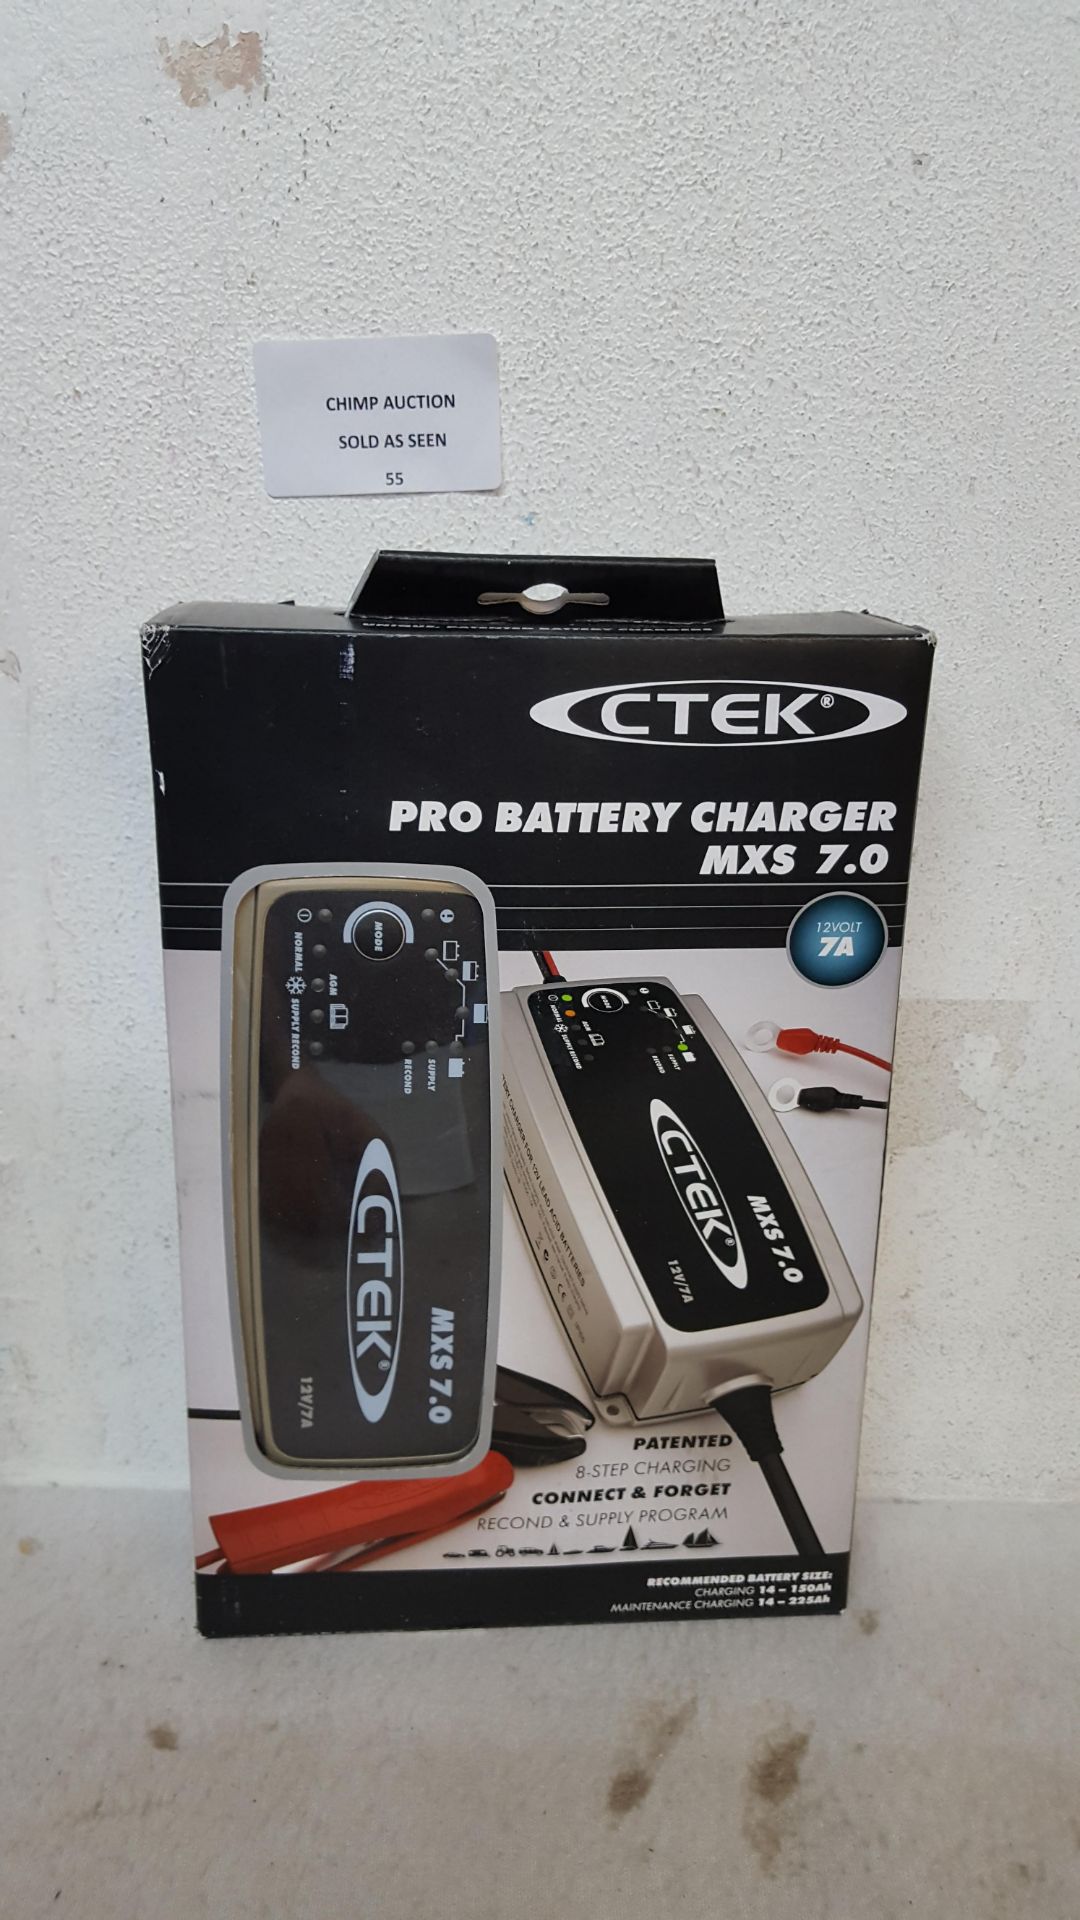 CTEK MXS 7.0 7A 12V Multi-Functional 8-Stage Car Battery Charger RRP £119.99